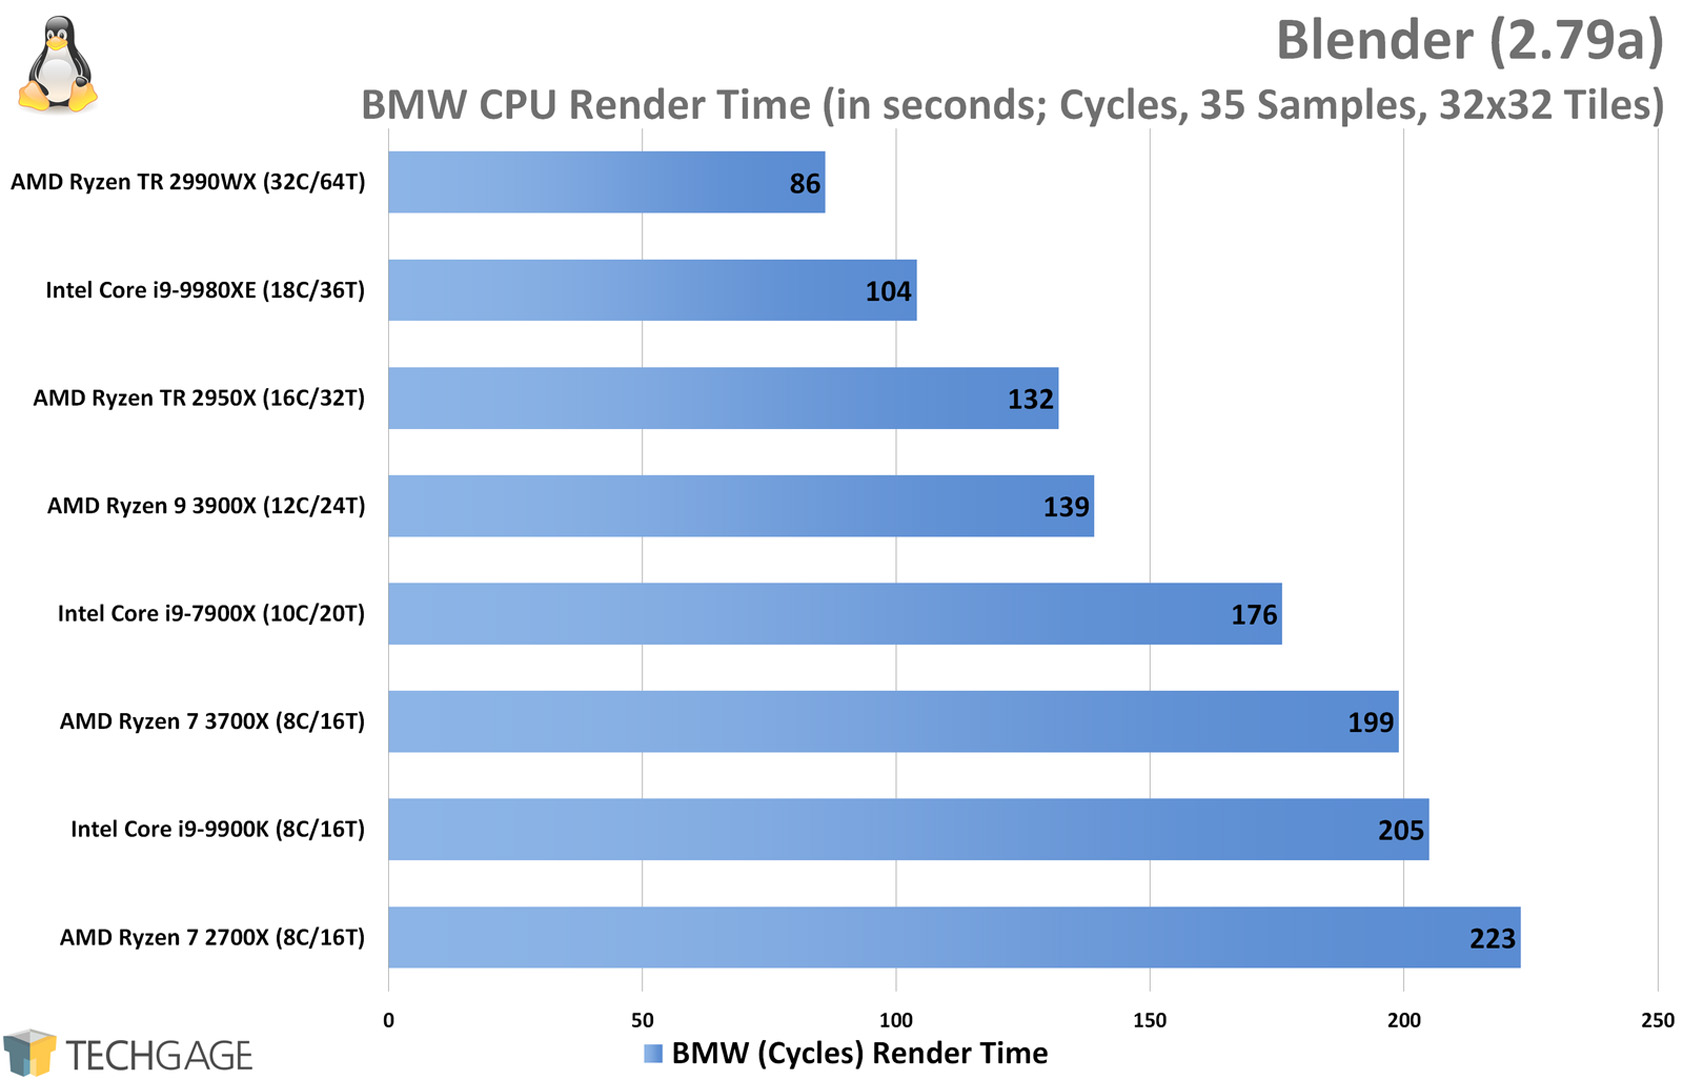 Blender Cycles Rendering Performance (BMW, AMD Ryzen 9 3900X and 7 3700X)